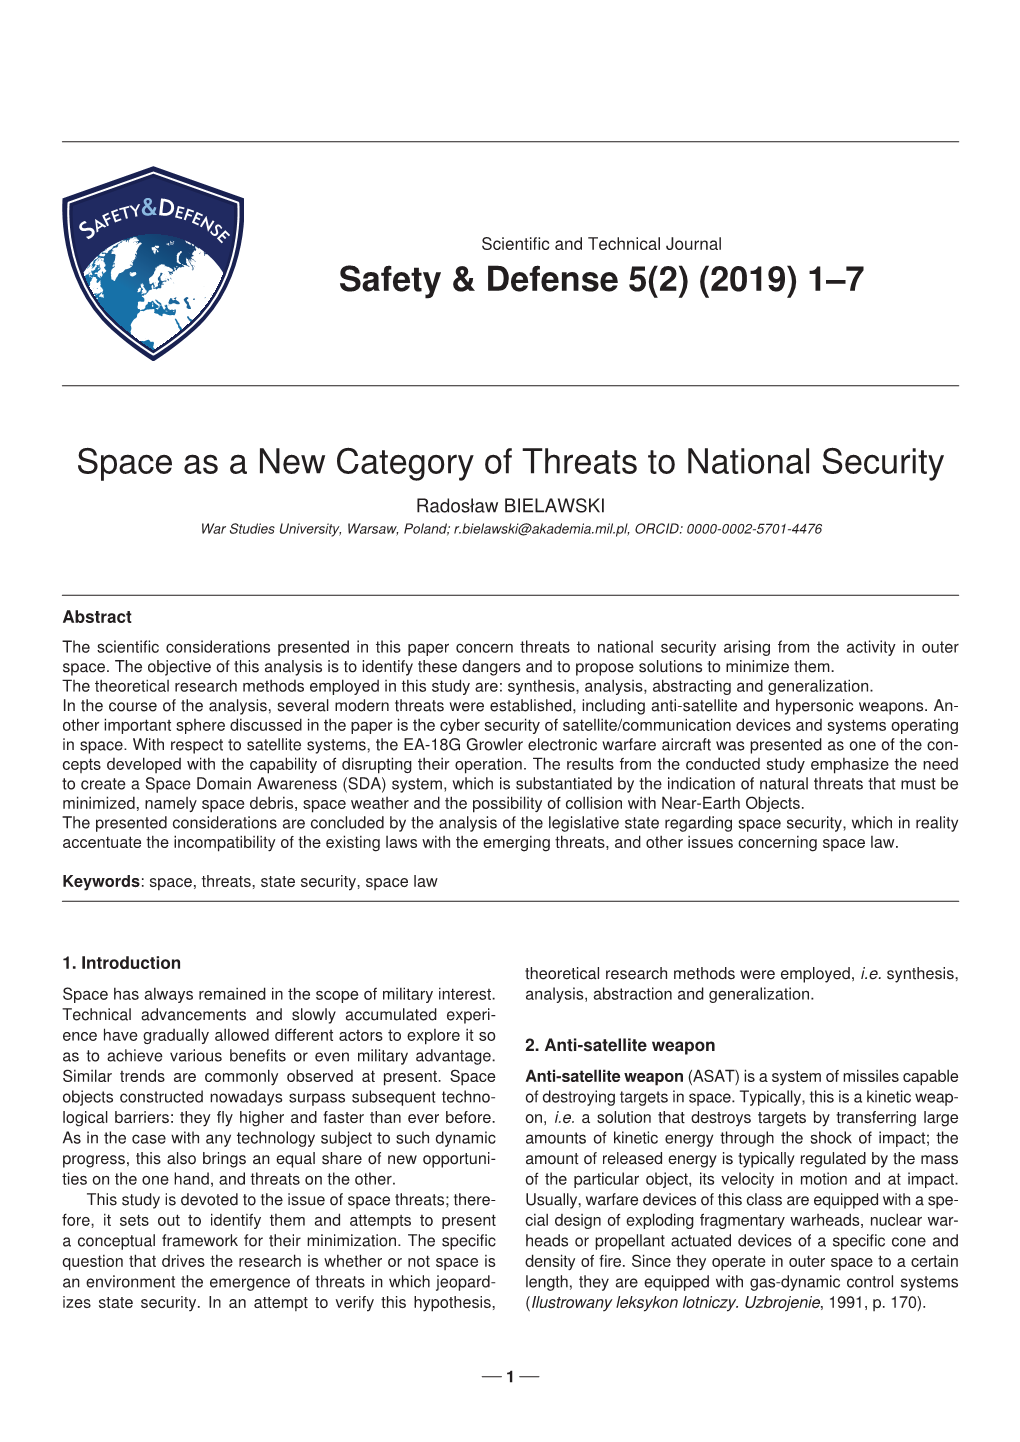 Space As a New Category of Threats to National Security